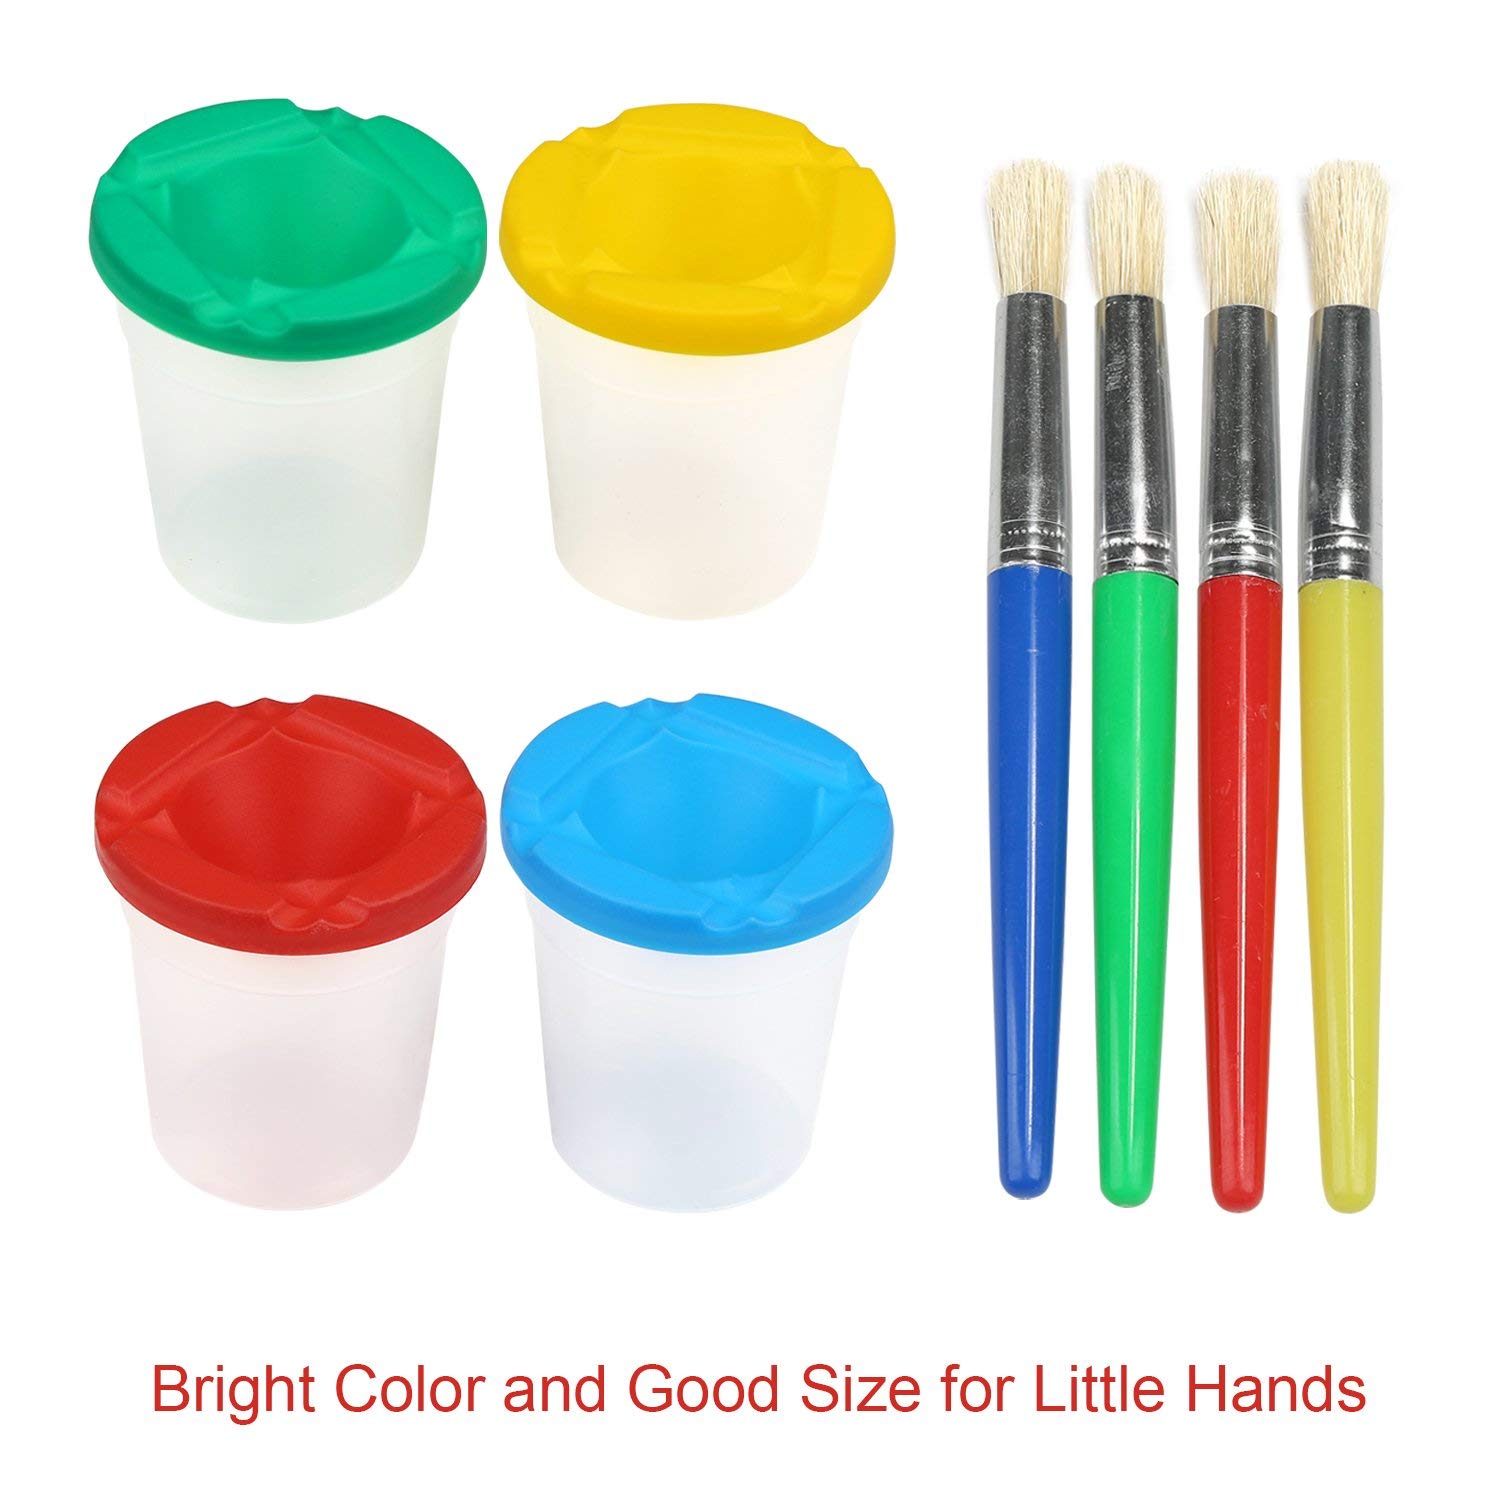 4pcs Kids Paint Bottles+Brushes Set Spill-Proof with Lids Children Painting Drawing Supply DIY Graffiti Tool Kit